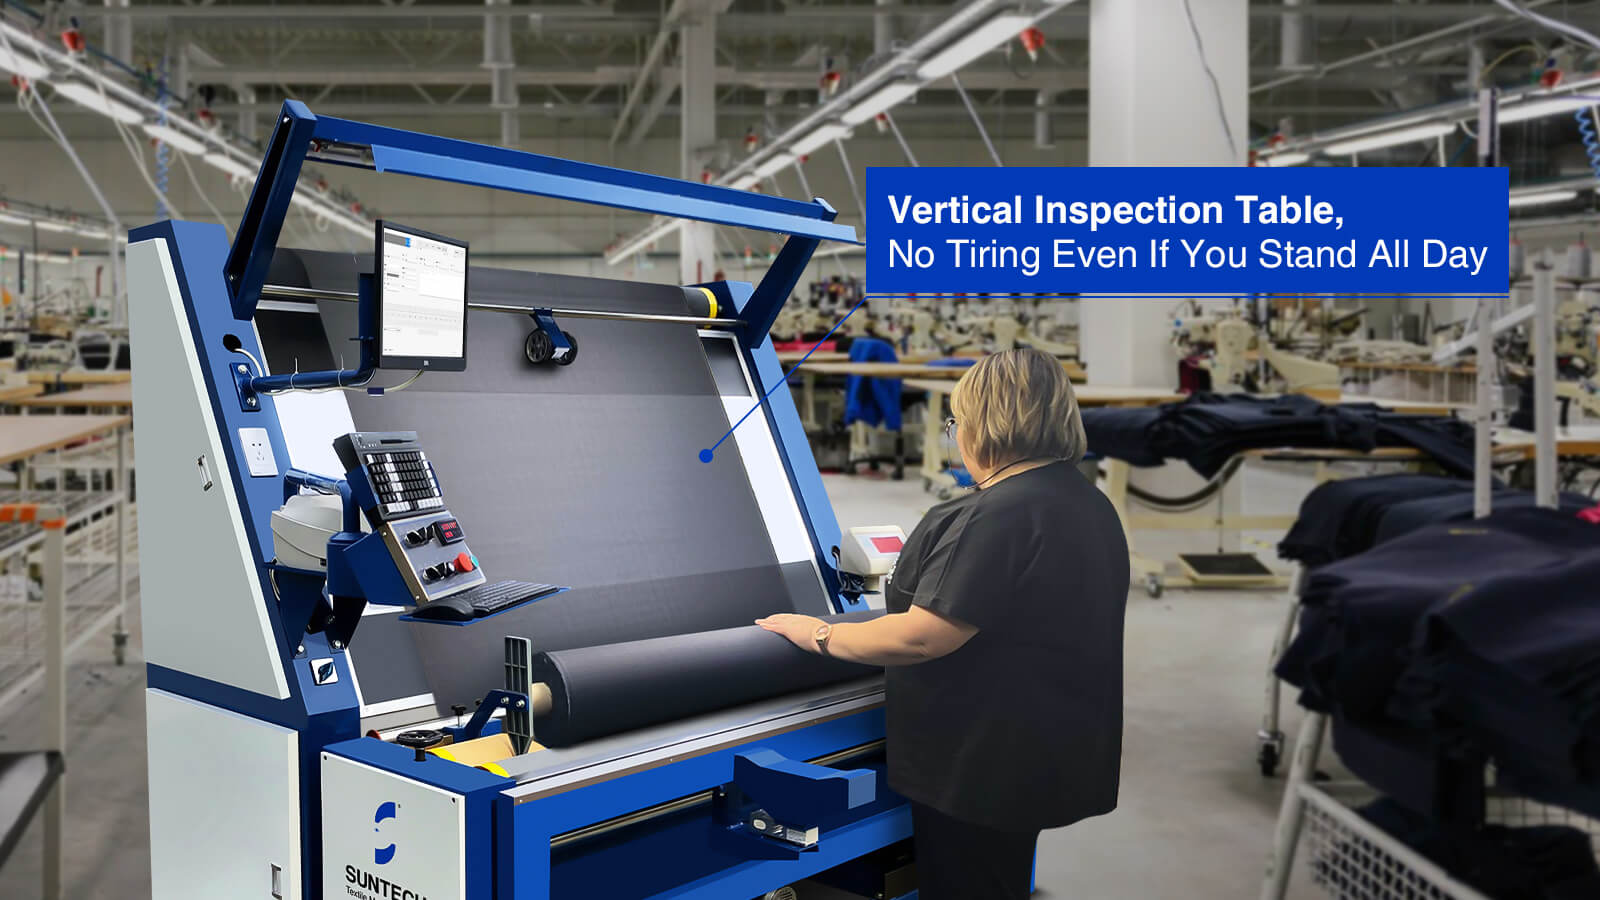 Woven Fabric Inspection Machine have vertical inspection table